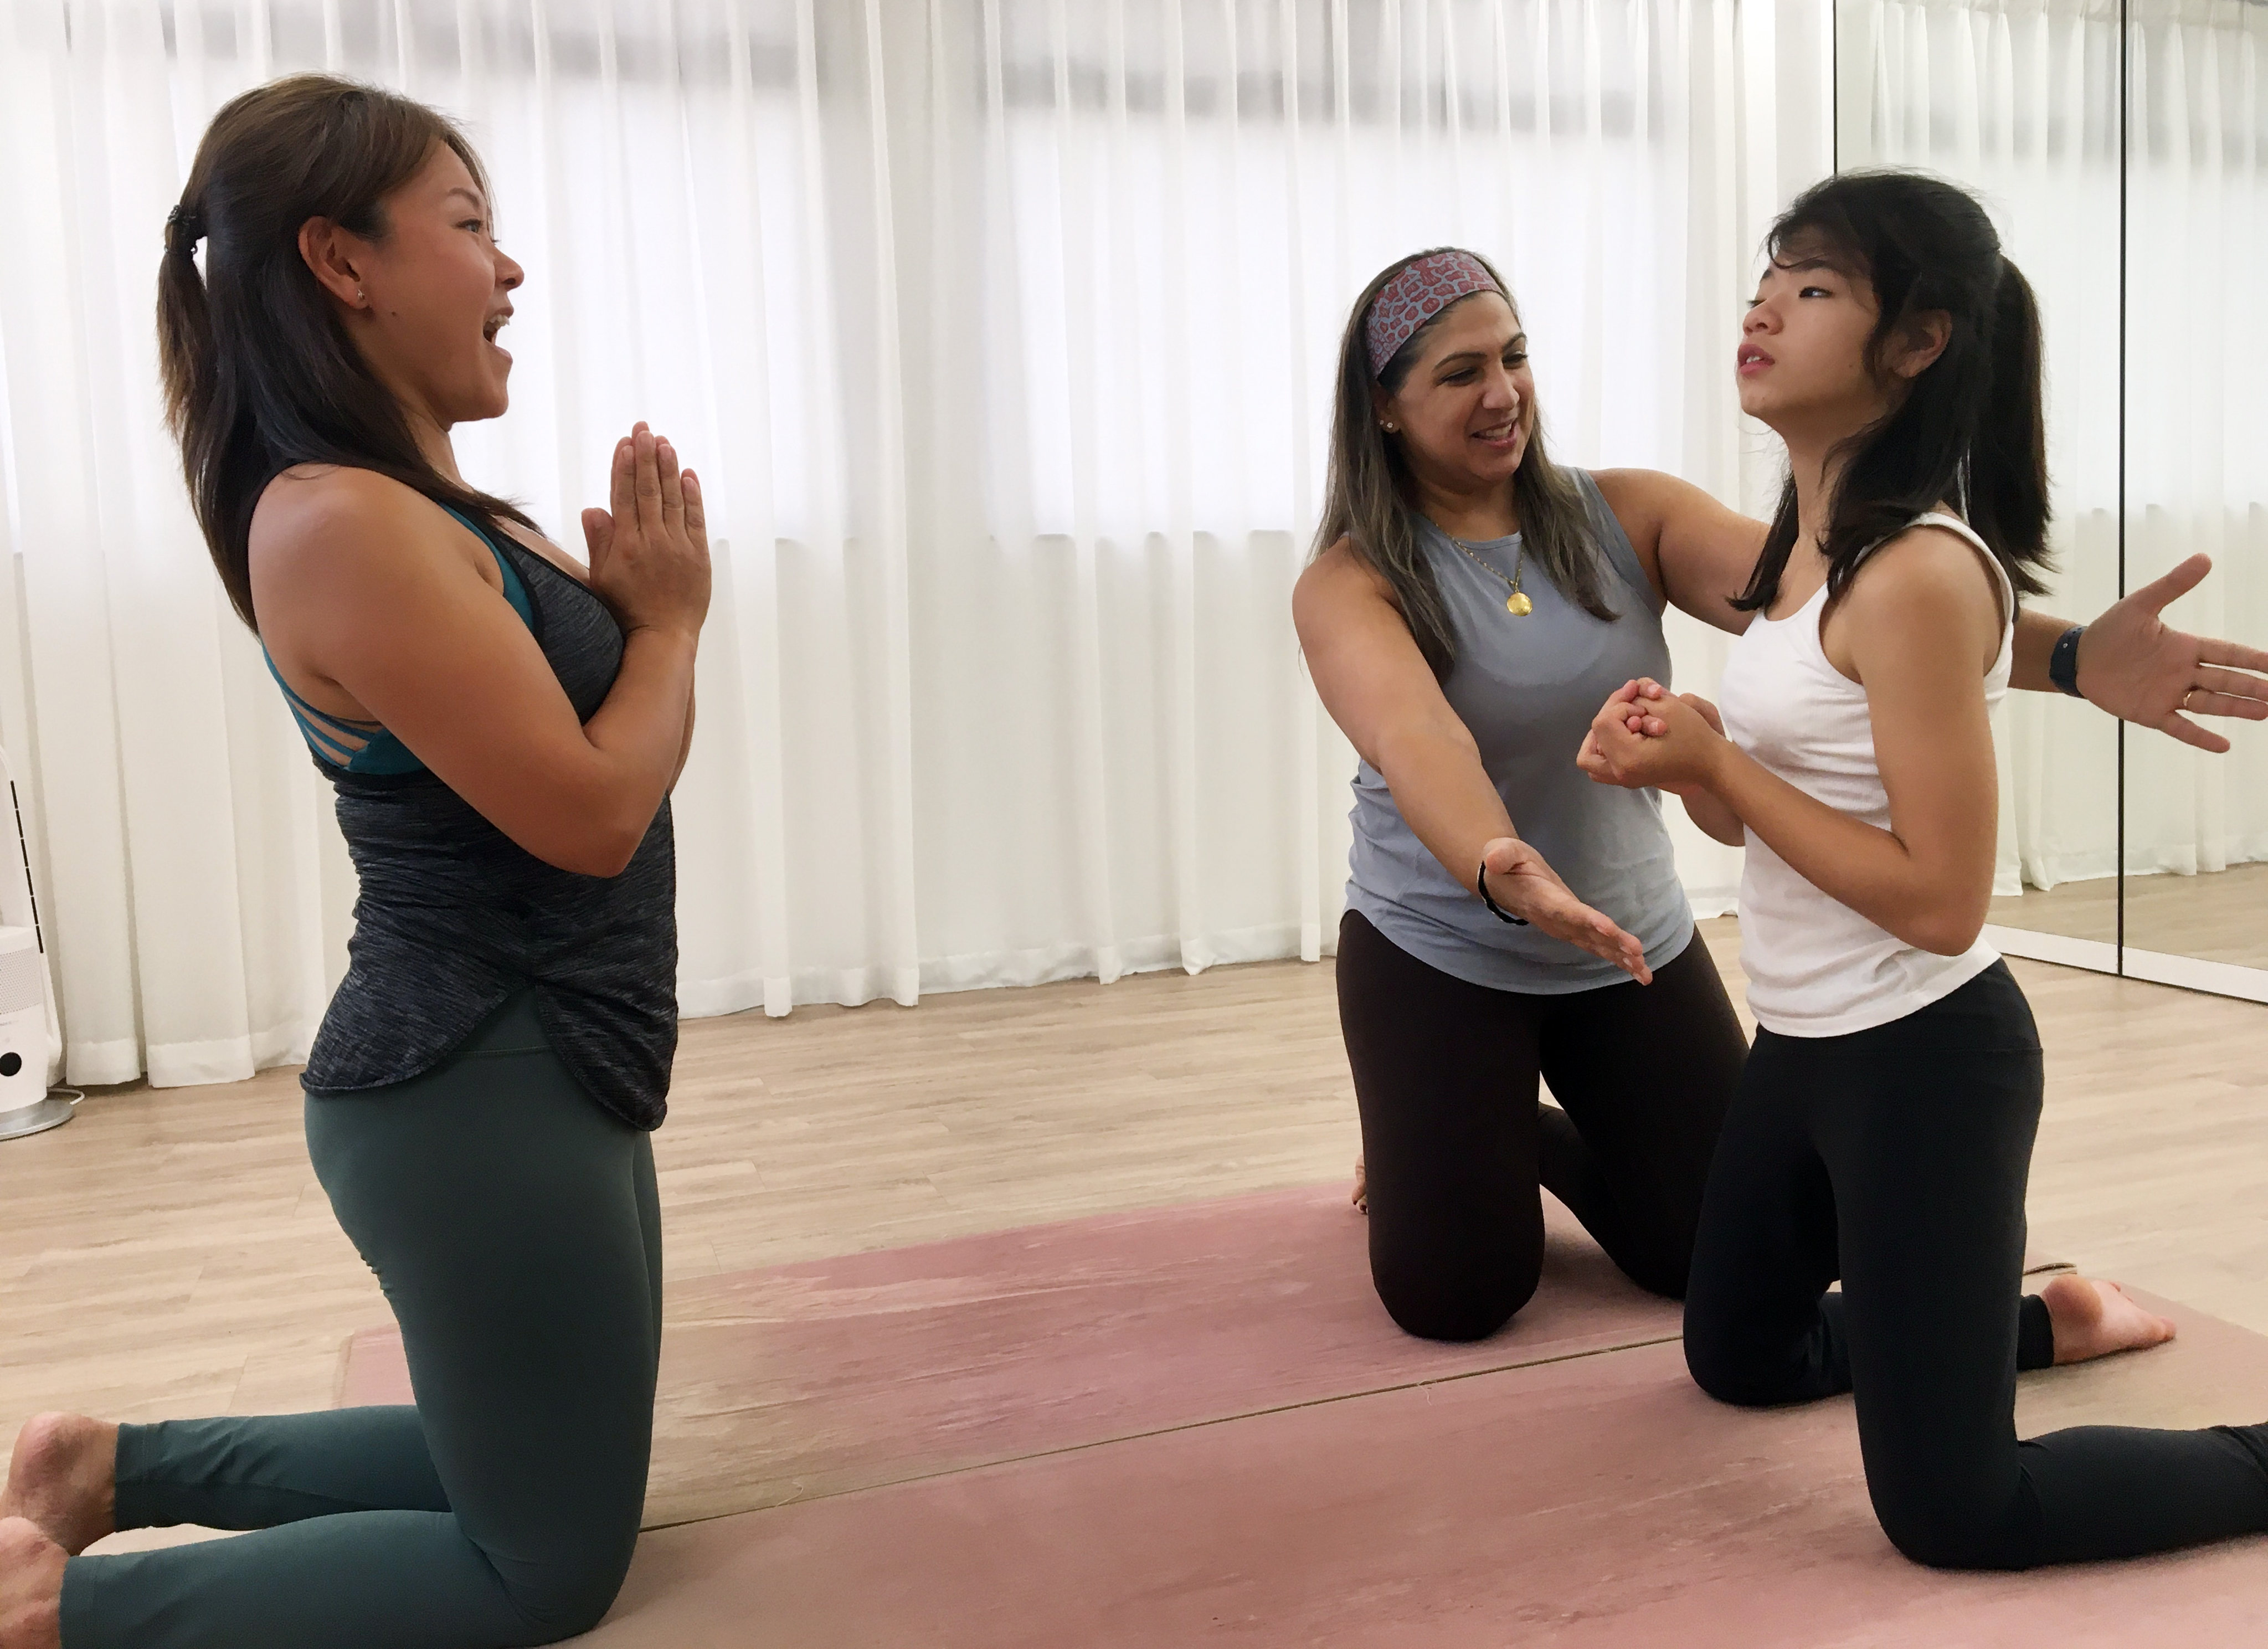 Yoga poses can be especially challenging for individuals such as Elia (right), who has hemorrhagic telangiectasia, a disease in which blood vessels do not develop properly. Photo: Cindy Sui